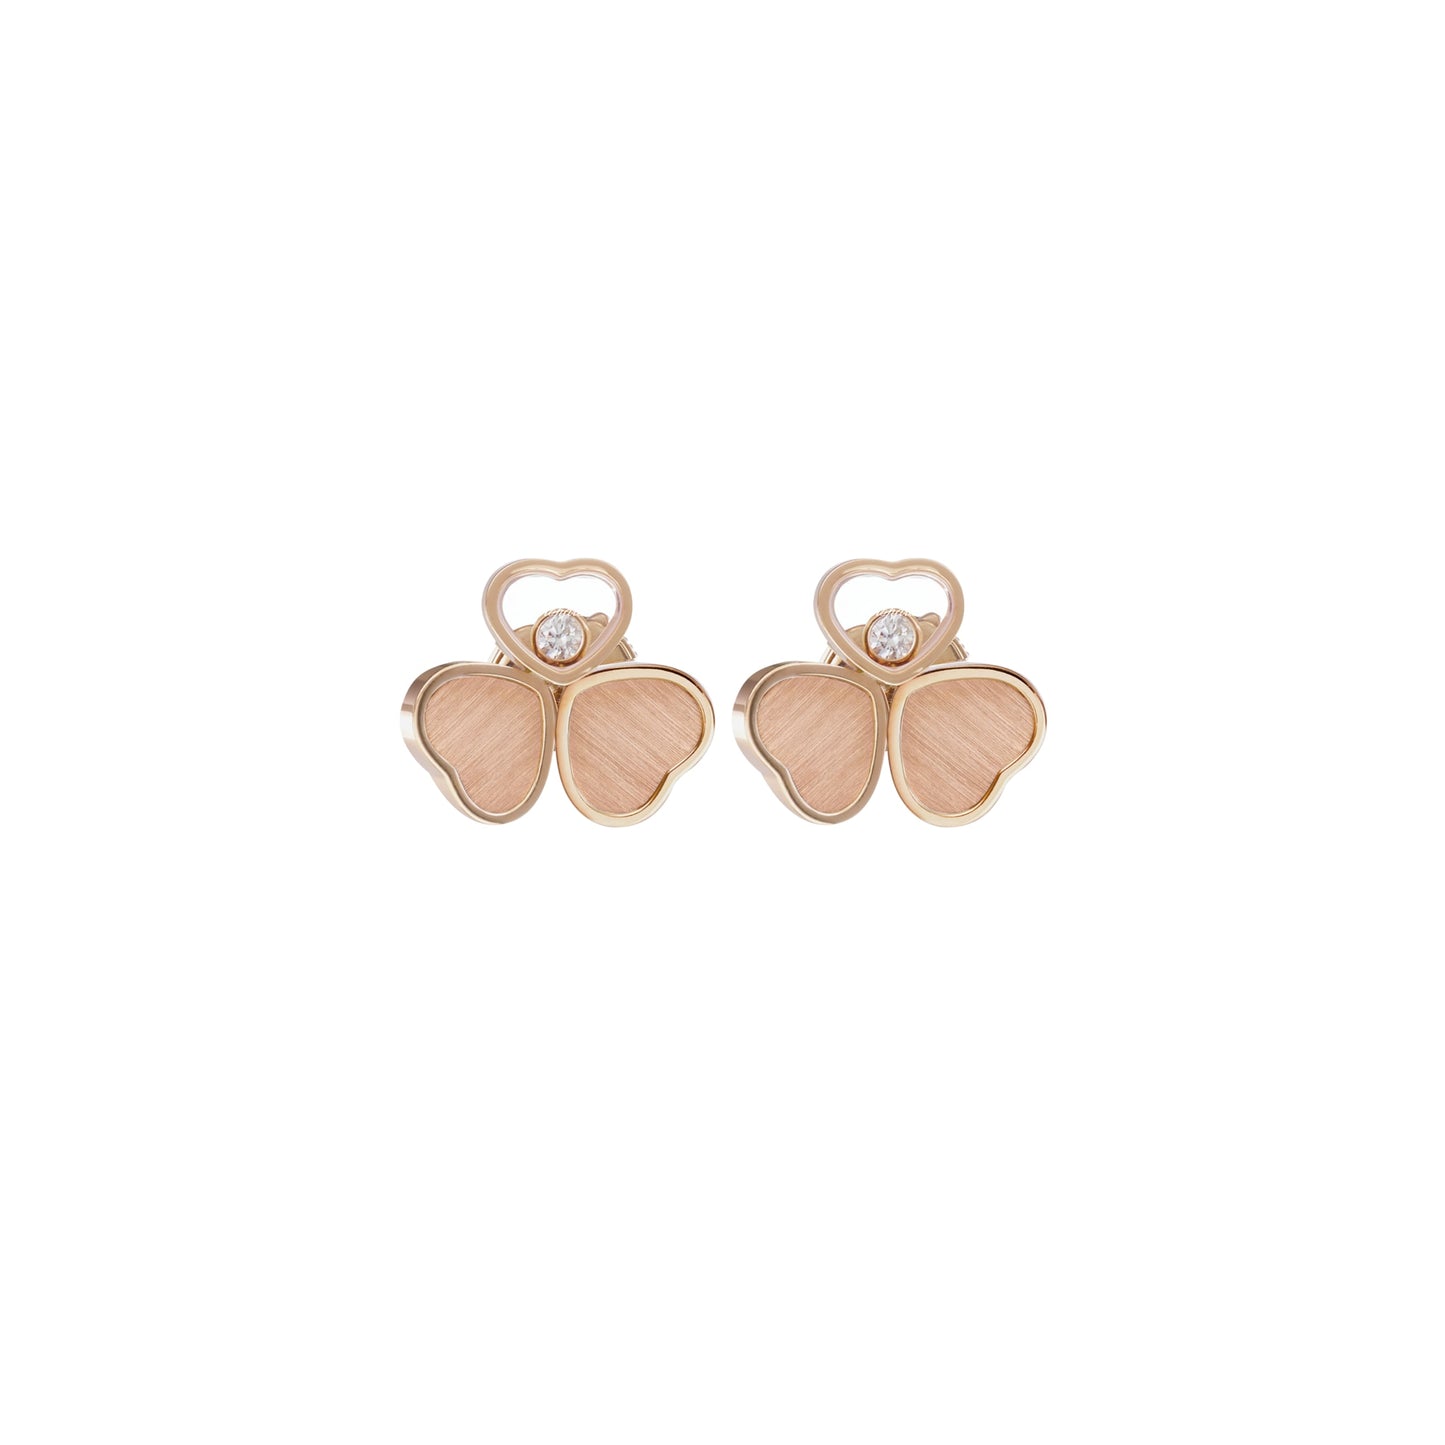 HAPPY HEARTS WINGS EARRINGS, ETHICAL ROSE GOLD, DIAMONDS 83A083-5701